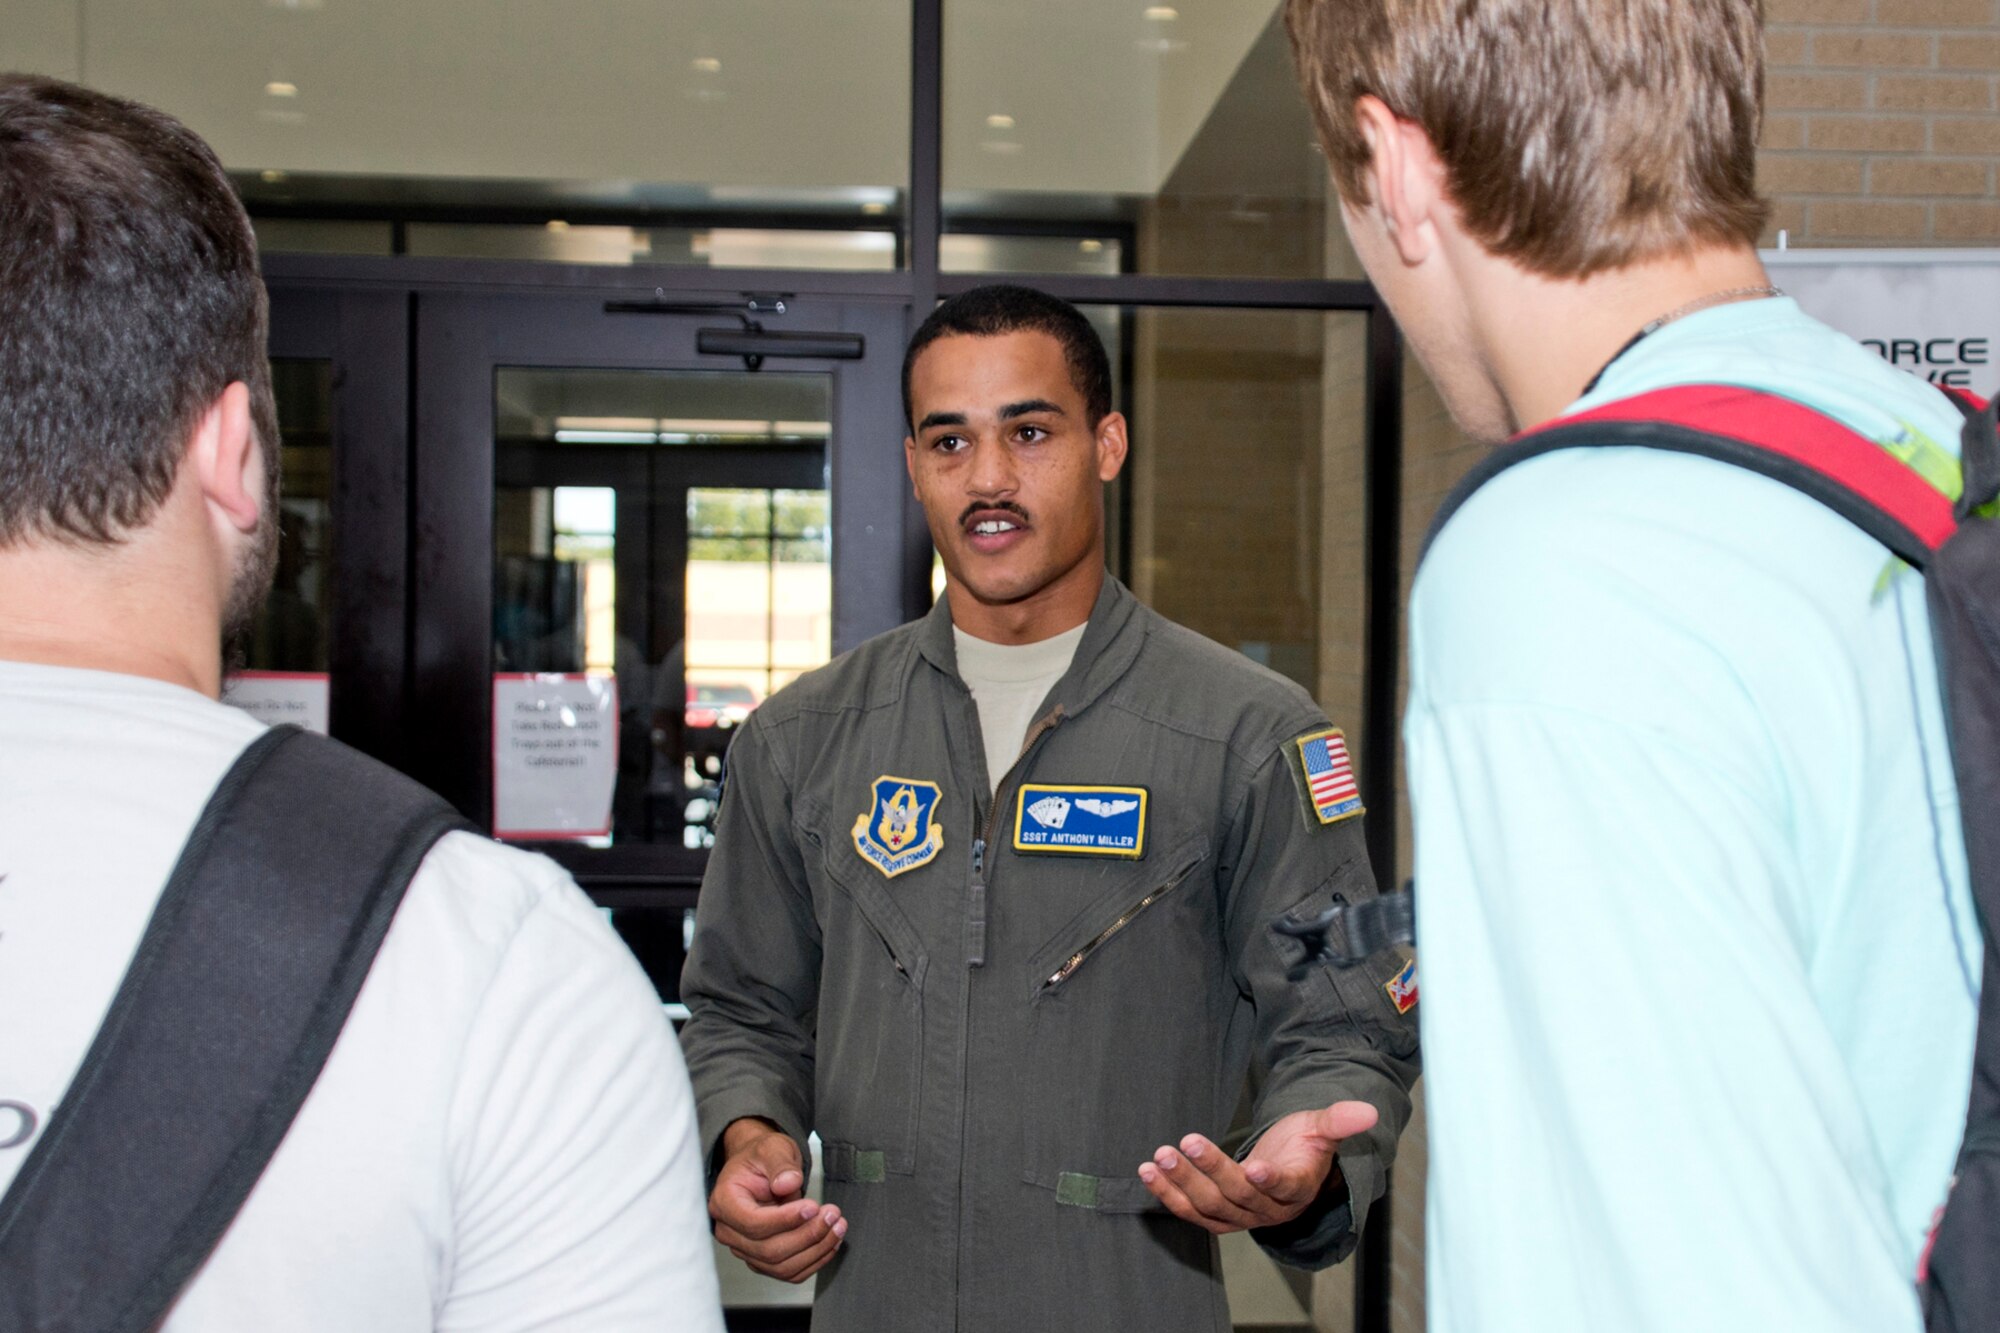 U.S. Air Force Reserve Staff Sgt. Anthony Miller, a loadmaster assigned to the 327th Airlift Squadron, 913th Airlift Group, speaks with potential recruits during the annual Cabot College and Career Fair at Cabot High School in Cabot, Ark., Sept. 28, 2017. More than 65 colleges, technical and vocational representatives and with military recruiters were on hand to answer questions for the juniors and seniors who attend the event. (U.S. Air Force photo by Master Sgt. Jeff Walston/Released)